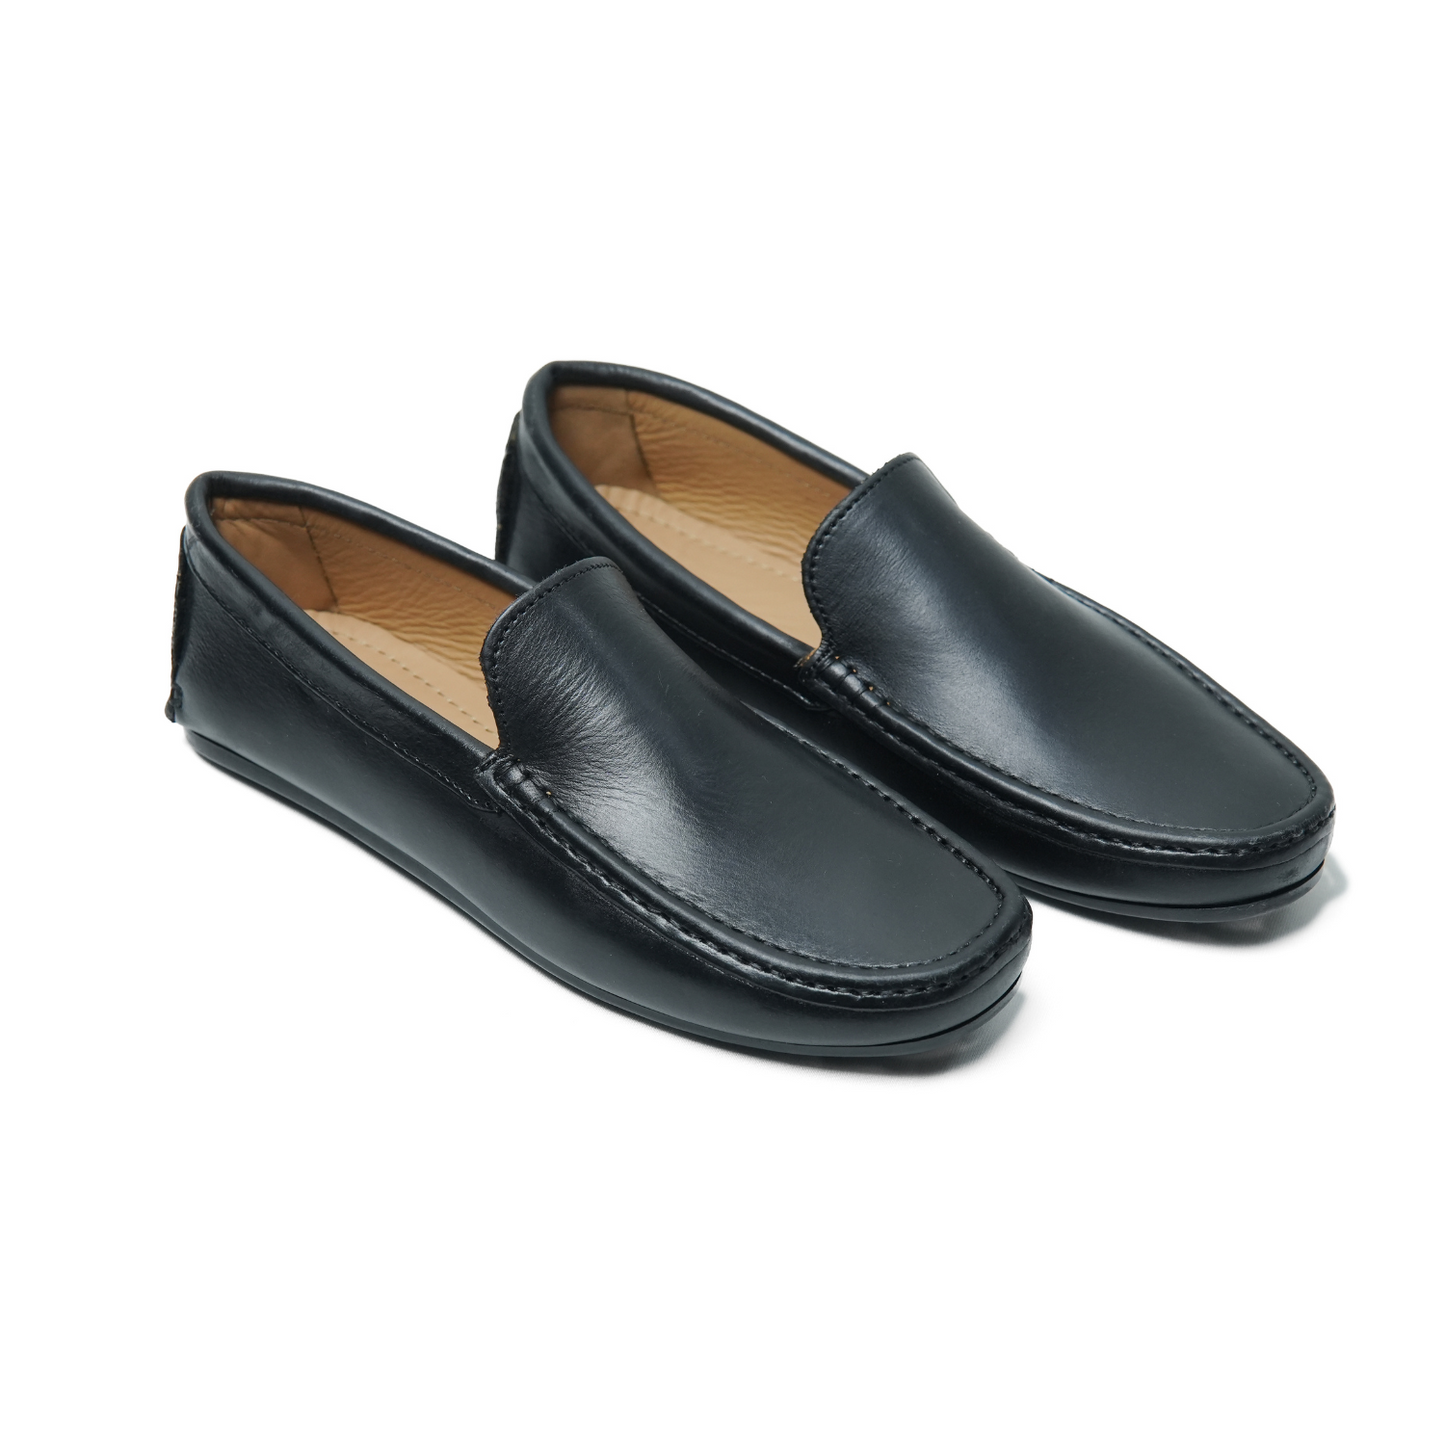 Day-To-Day Basic Loafers S2 Black